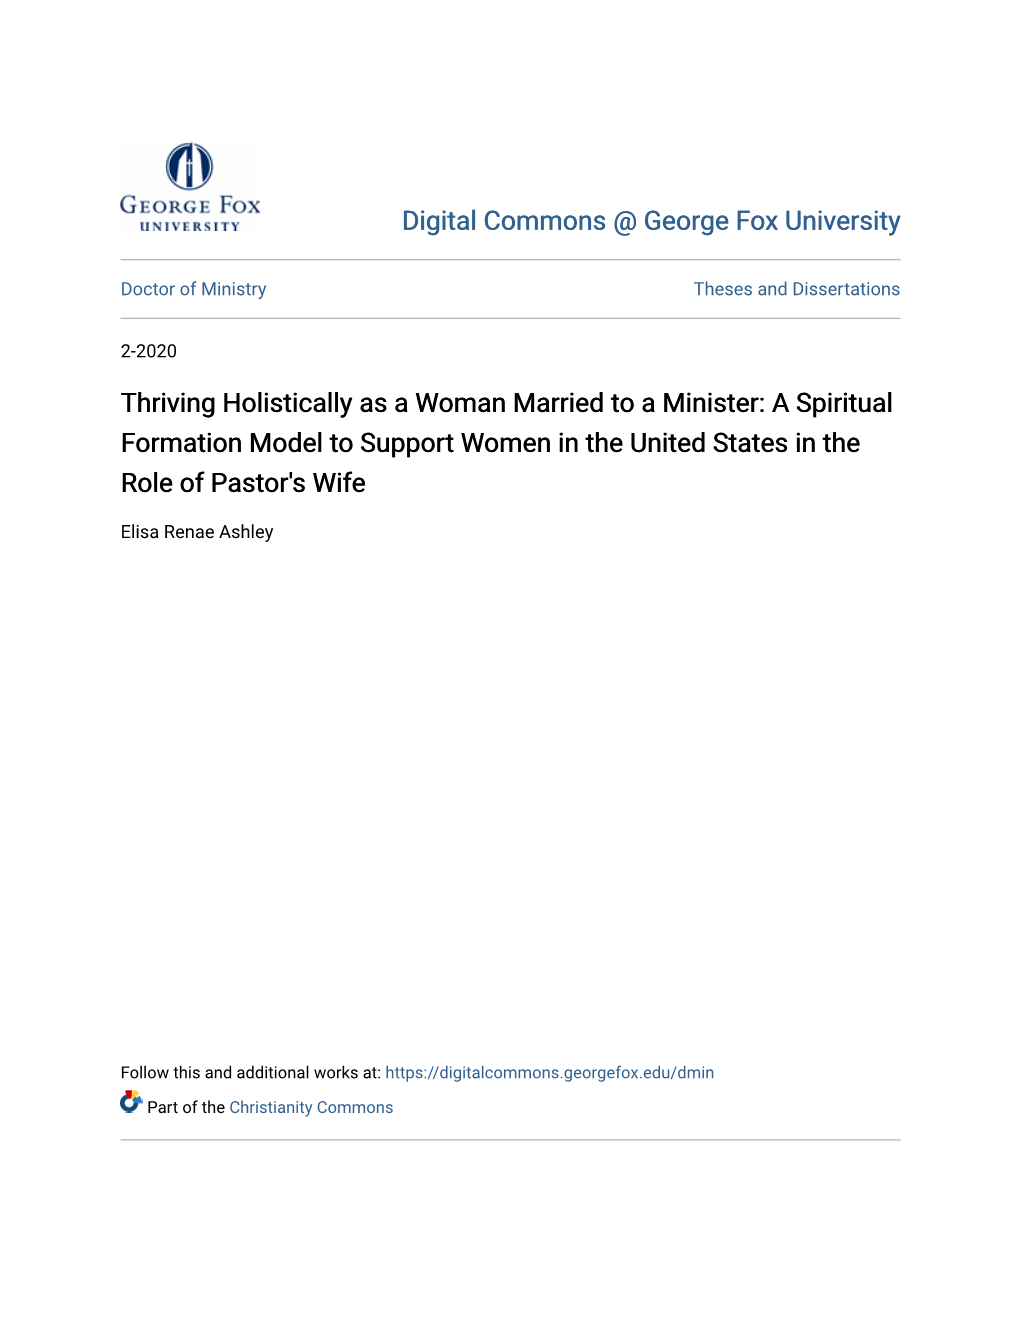 Thriving Holistically As a Woman Married to a Minister: a Spiritual Formation Model to Support Women in the United States in the Role of Pastor's Wife